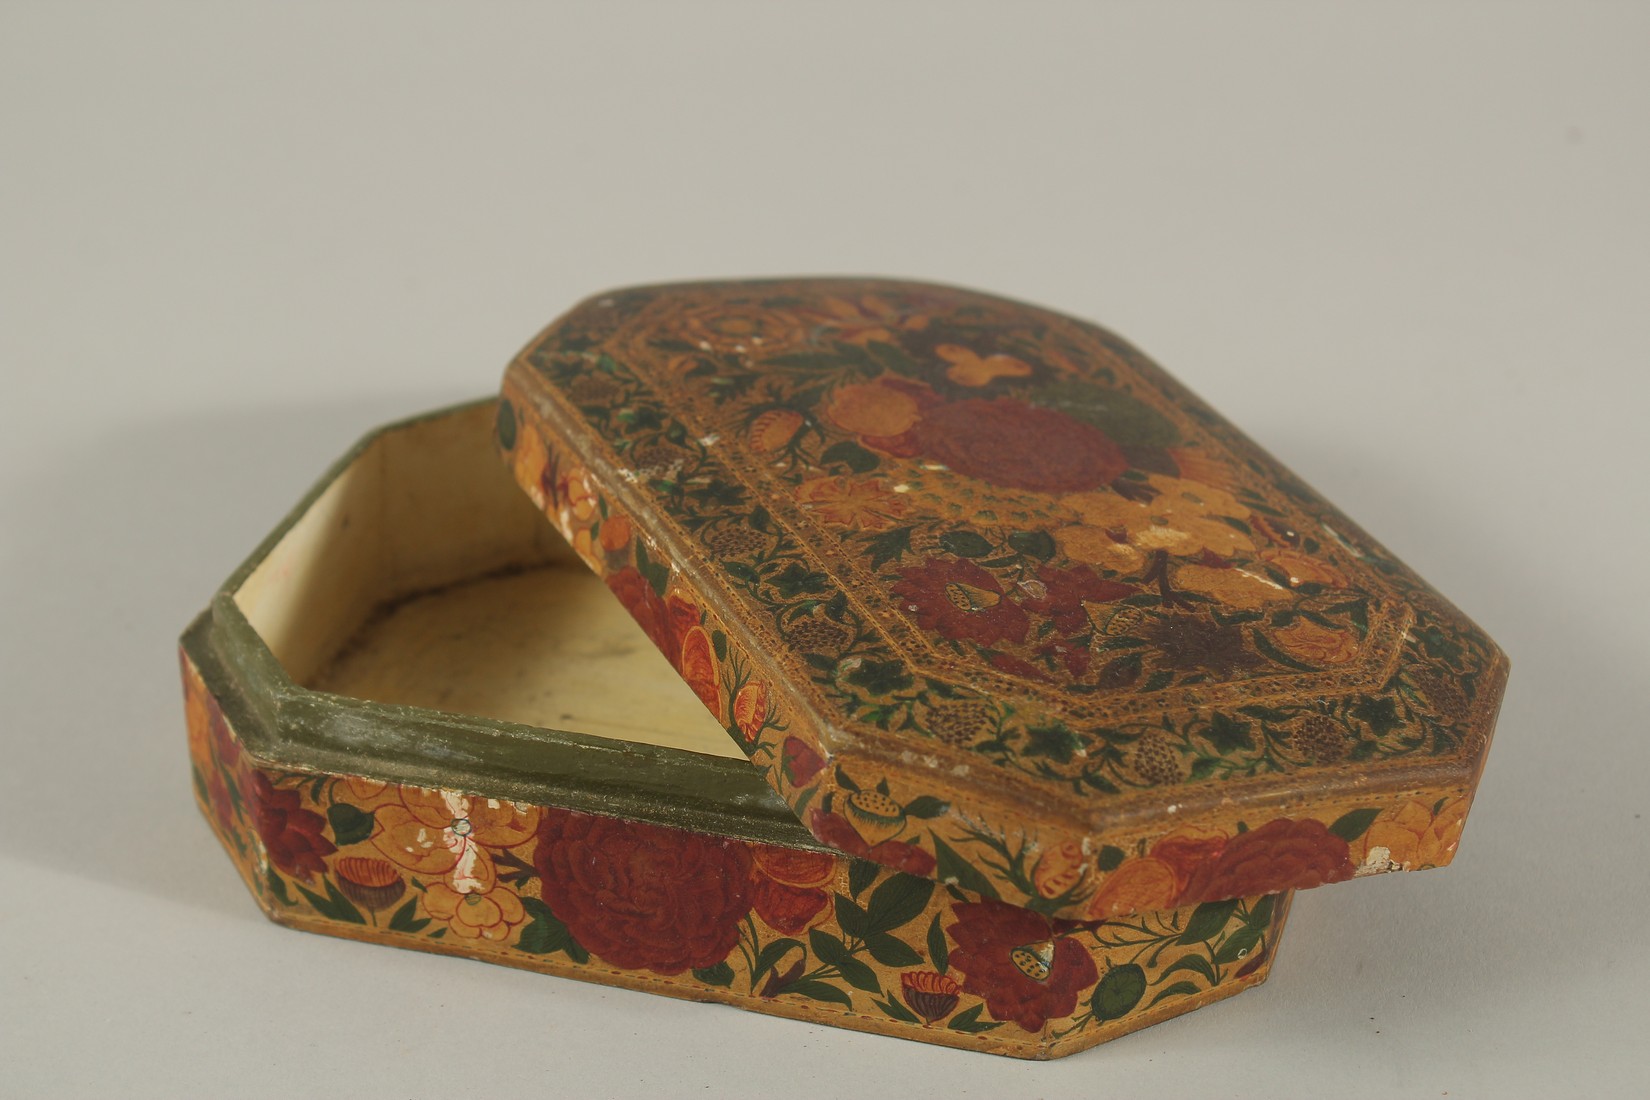 A 19TH CENTURY INDIAN KASHMIRI GILDED AND LACQUERED PAPIER MACHE BOX, SIGNED BY SUFFERING MOSES, - Image 3 of 4